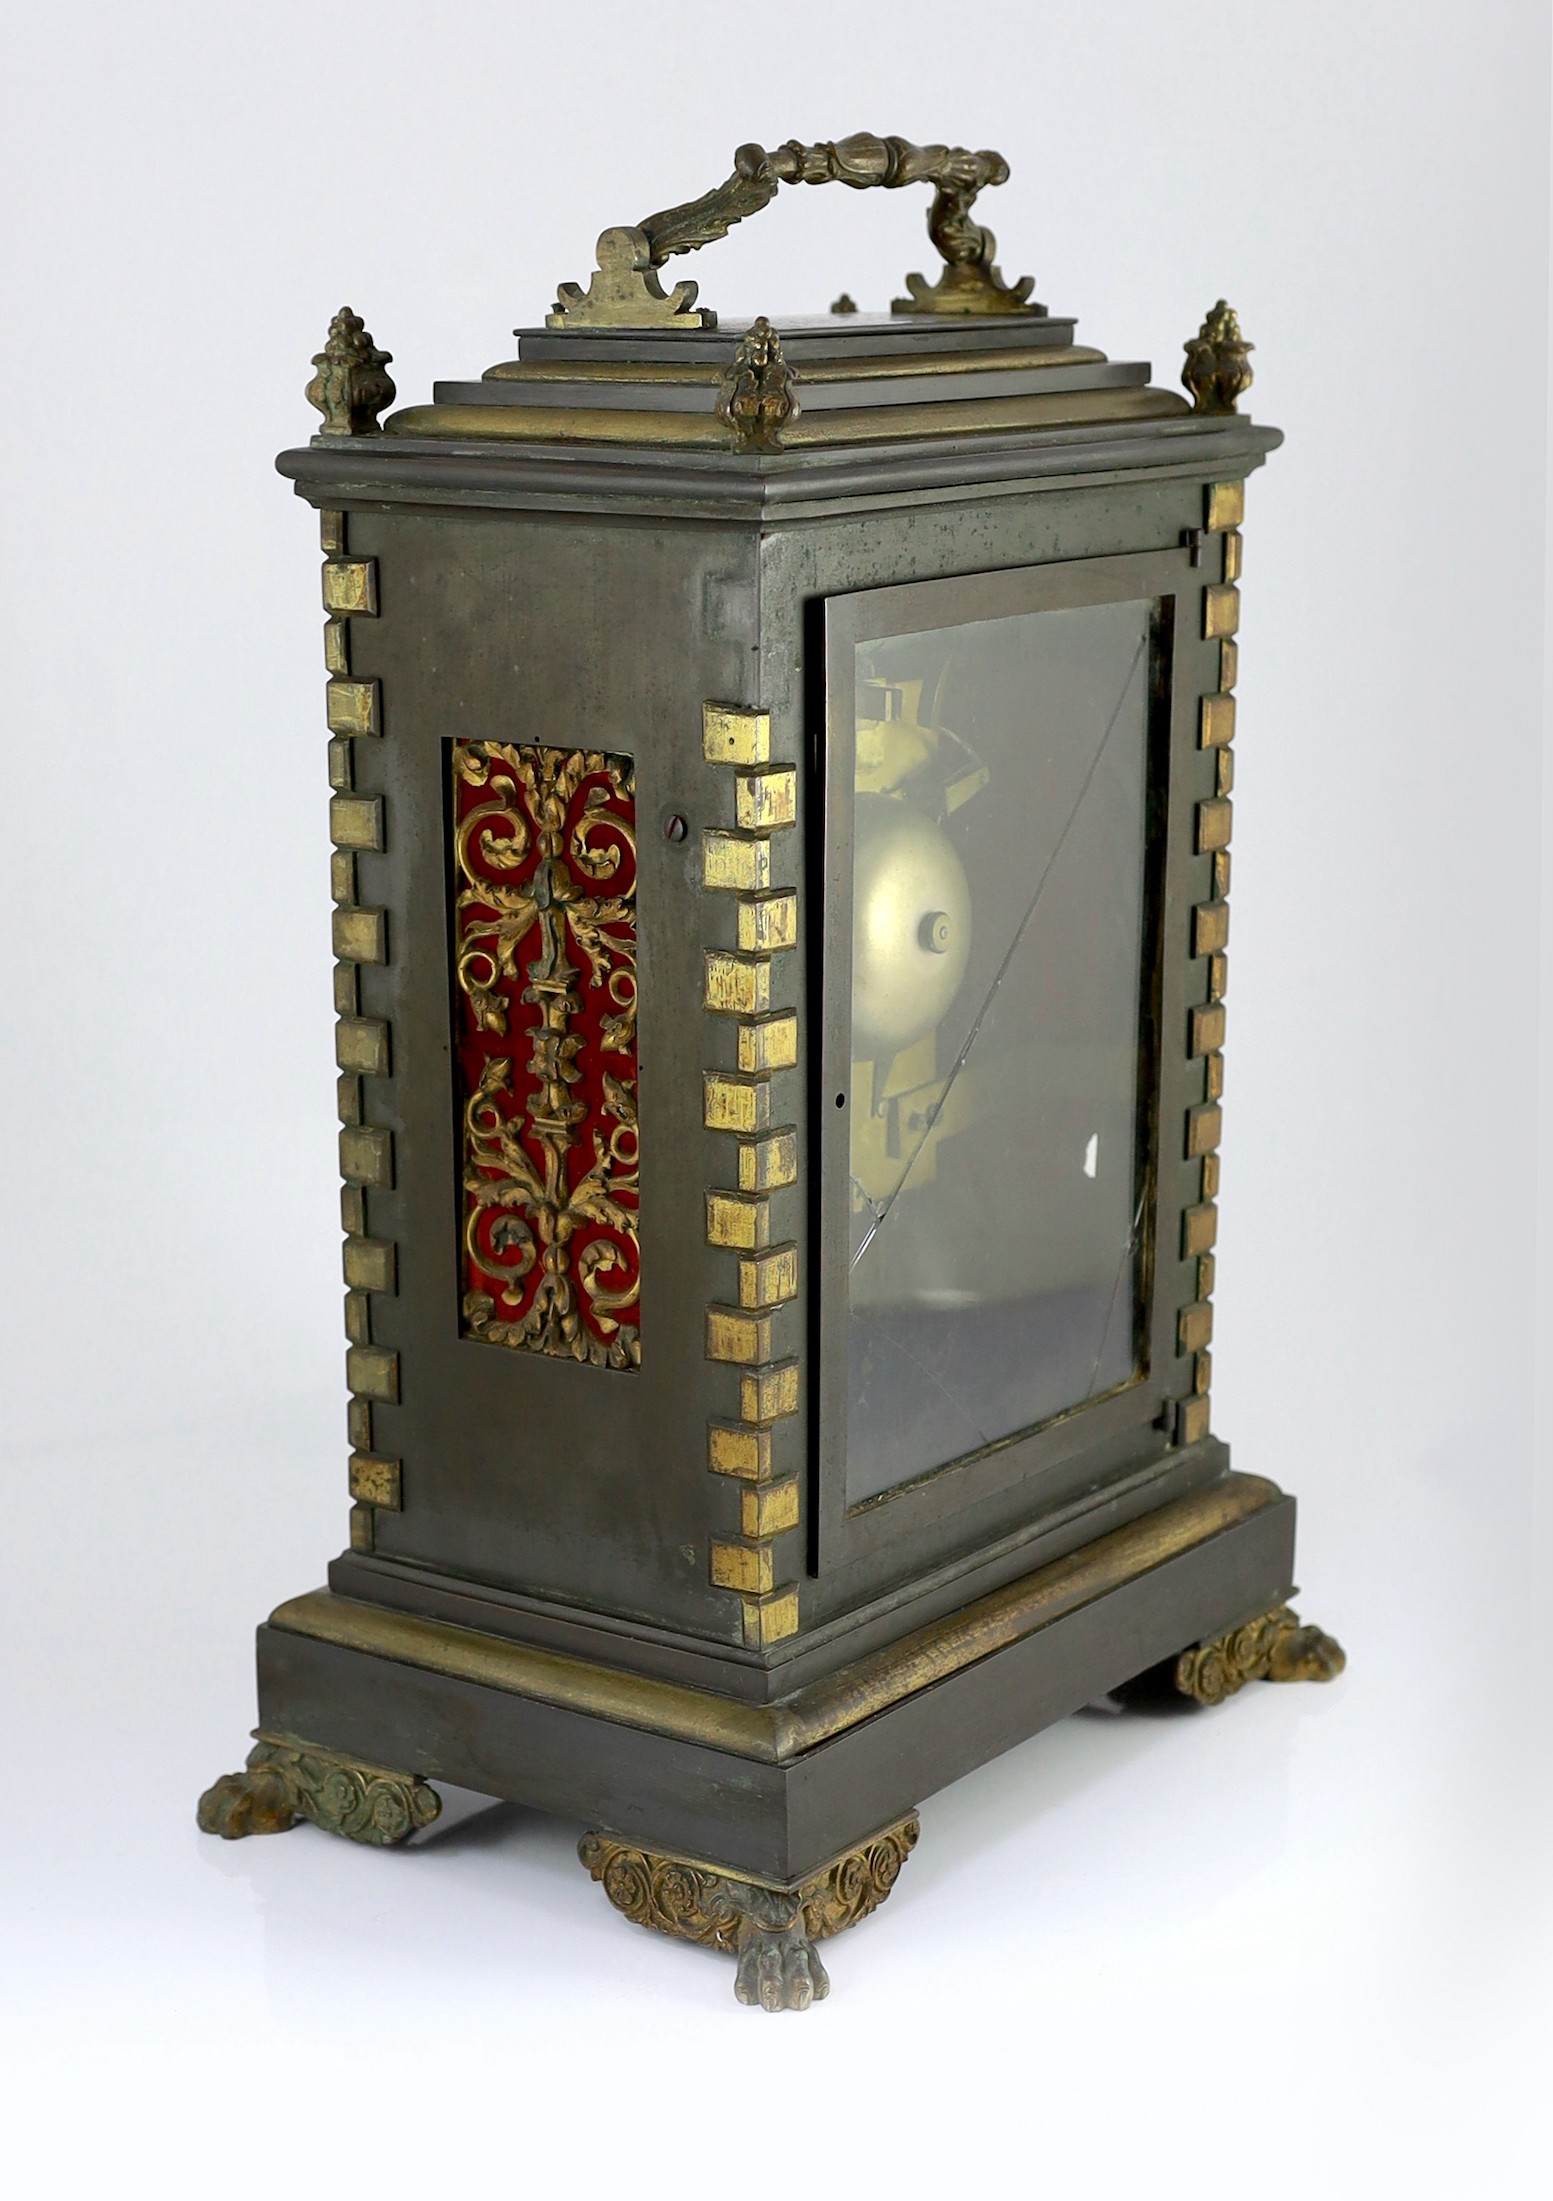 Feltham of Jersey. An early Victorian ormolu mounted ebonised bronze bracket clock, in architectural - Image 3 of 4